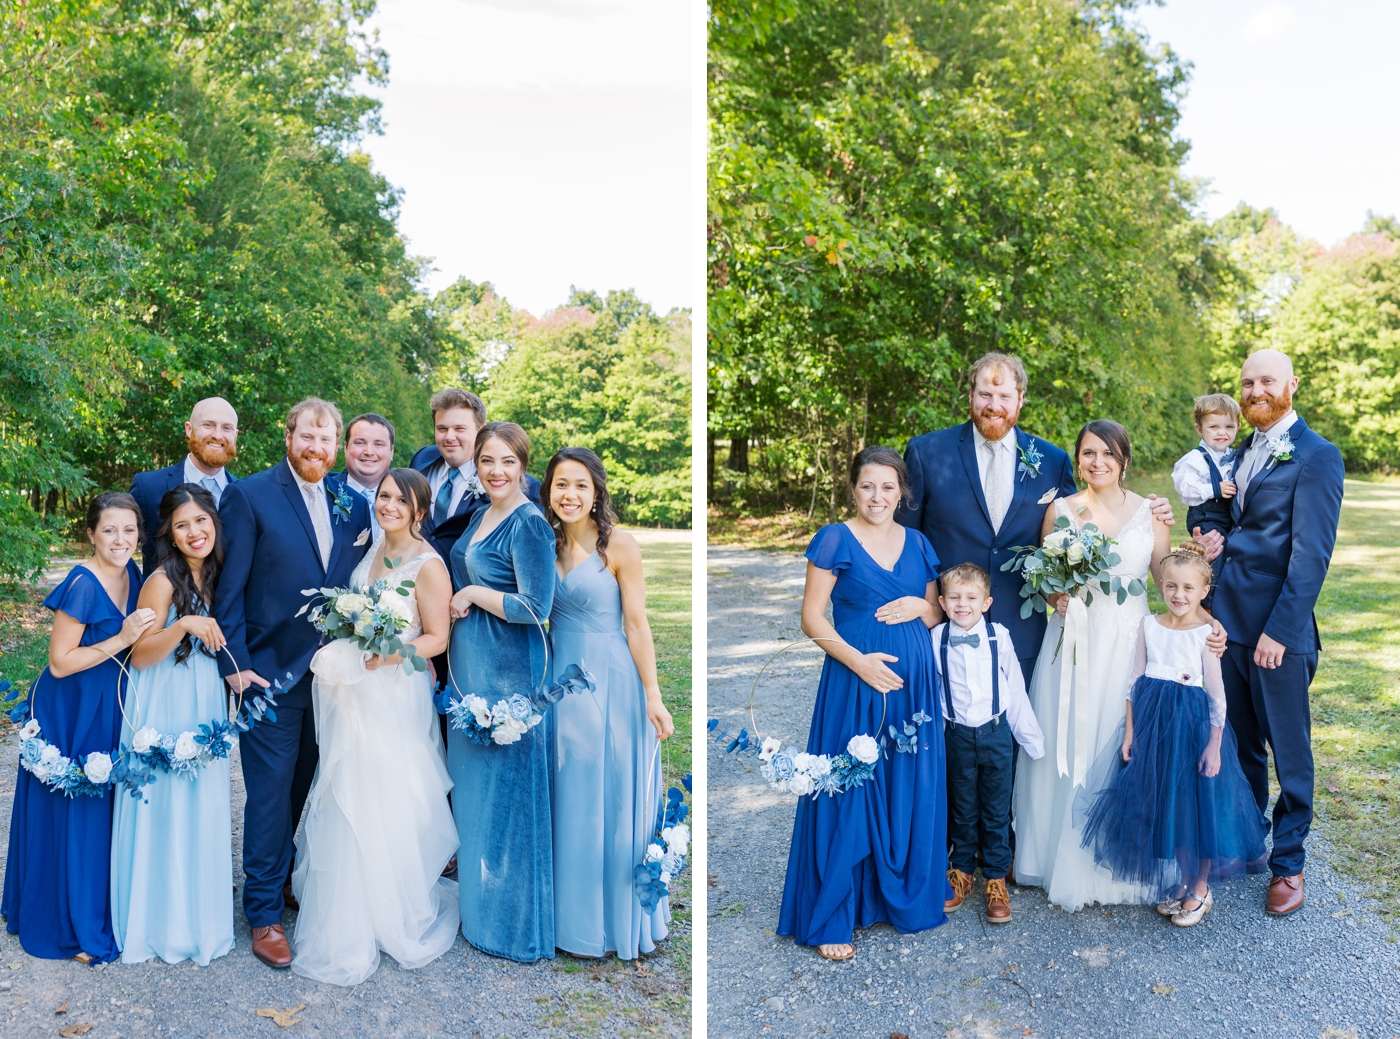 Bridal party in soft blue and navy bridesmaids dresses